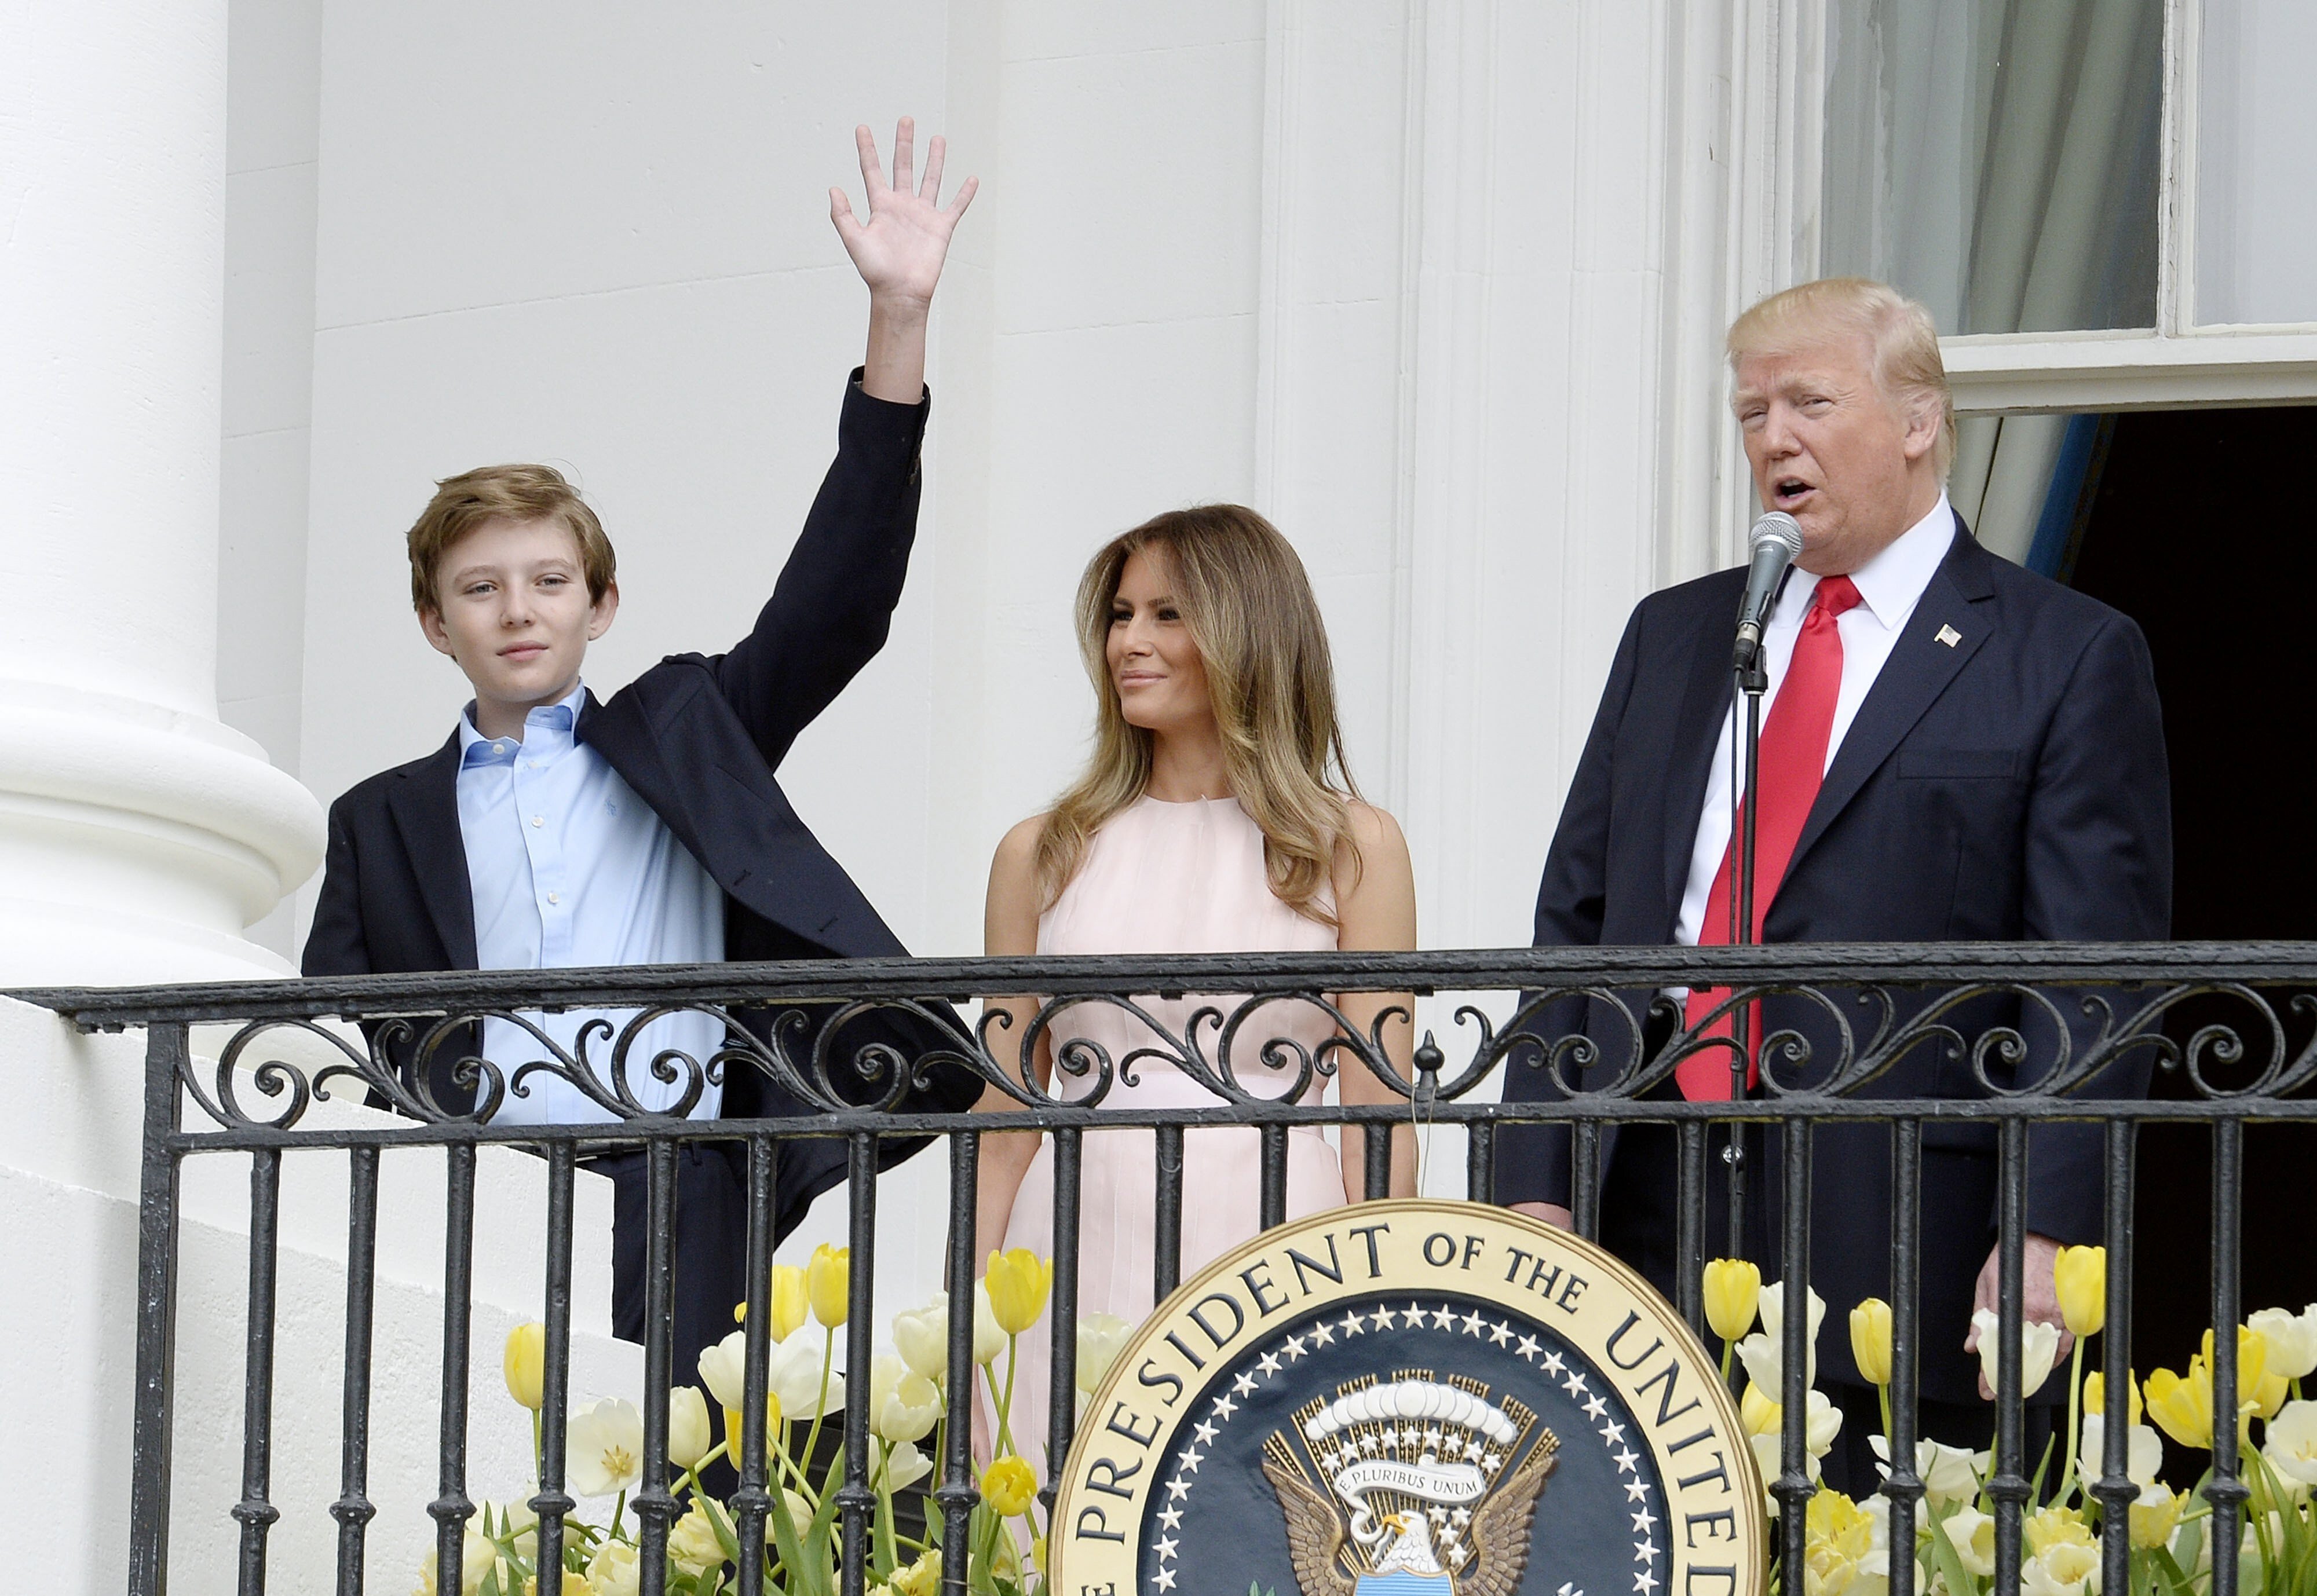 US president Donald Trump and first lady Melania are staunch supporters of their son Barron’s love of soccer. Photo: EPA/SIPA Pool